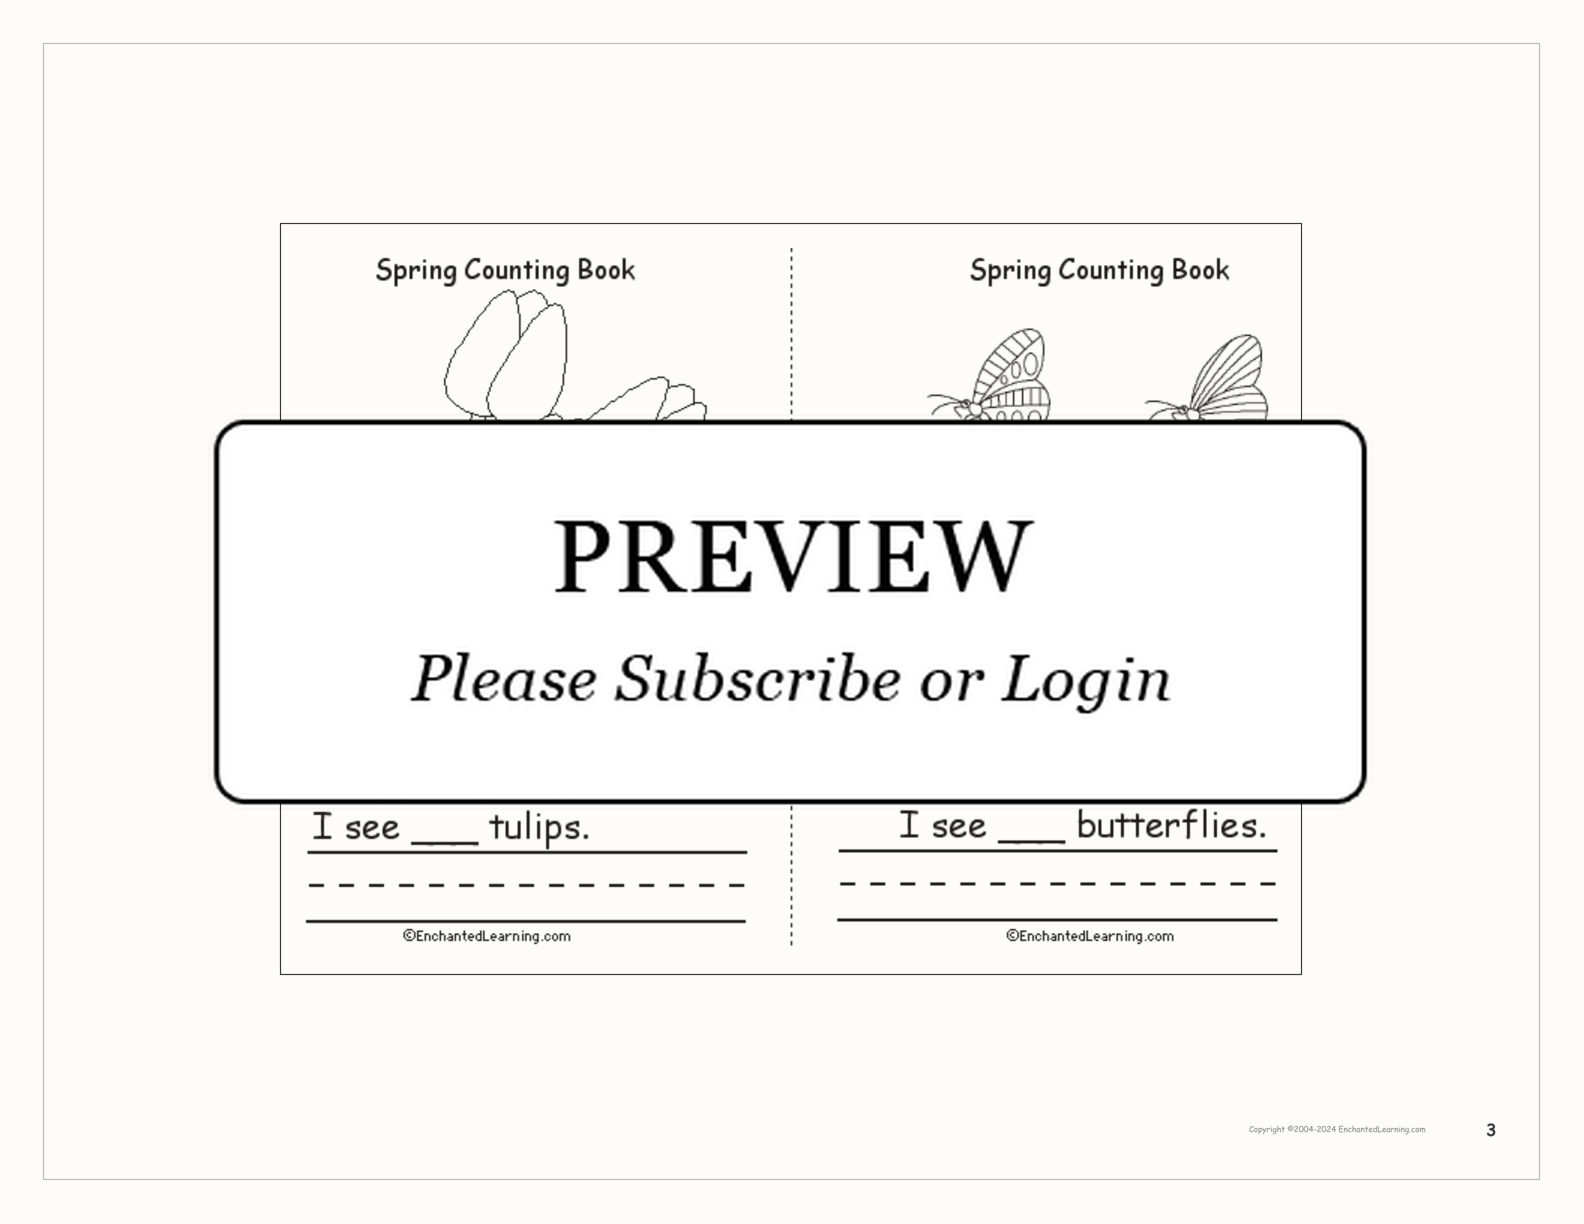 Spring Counting Book interactive worksheet page 3